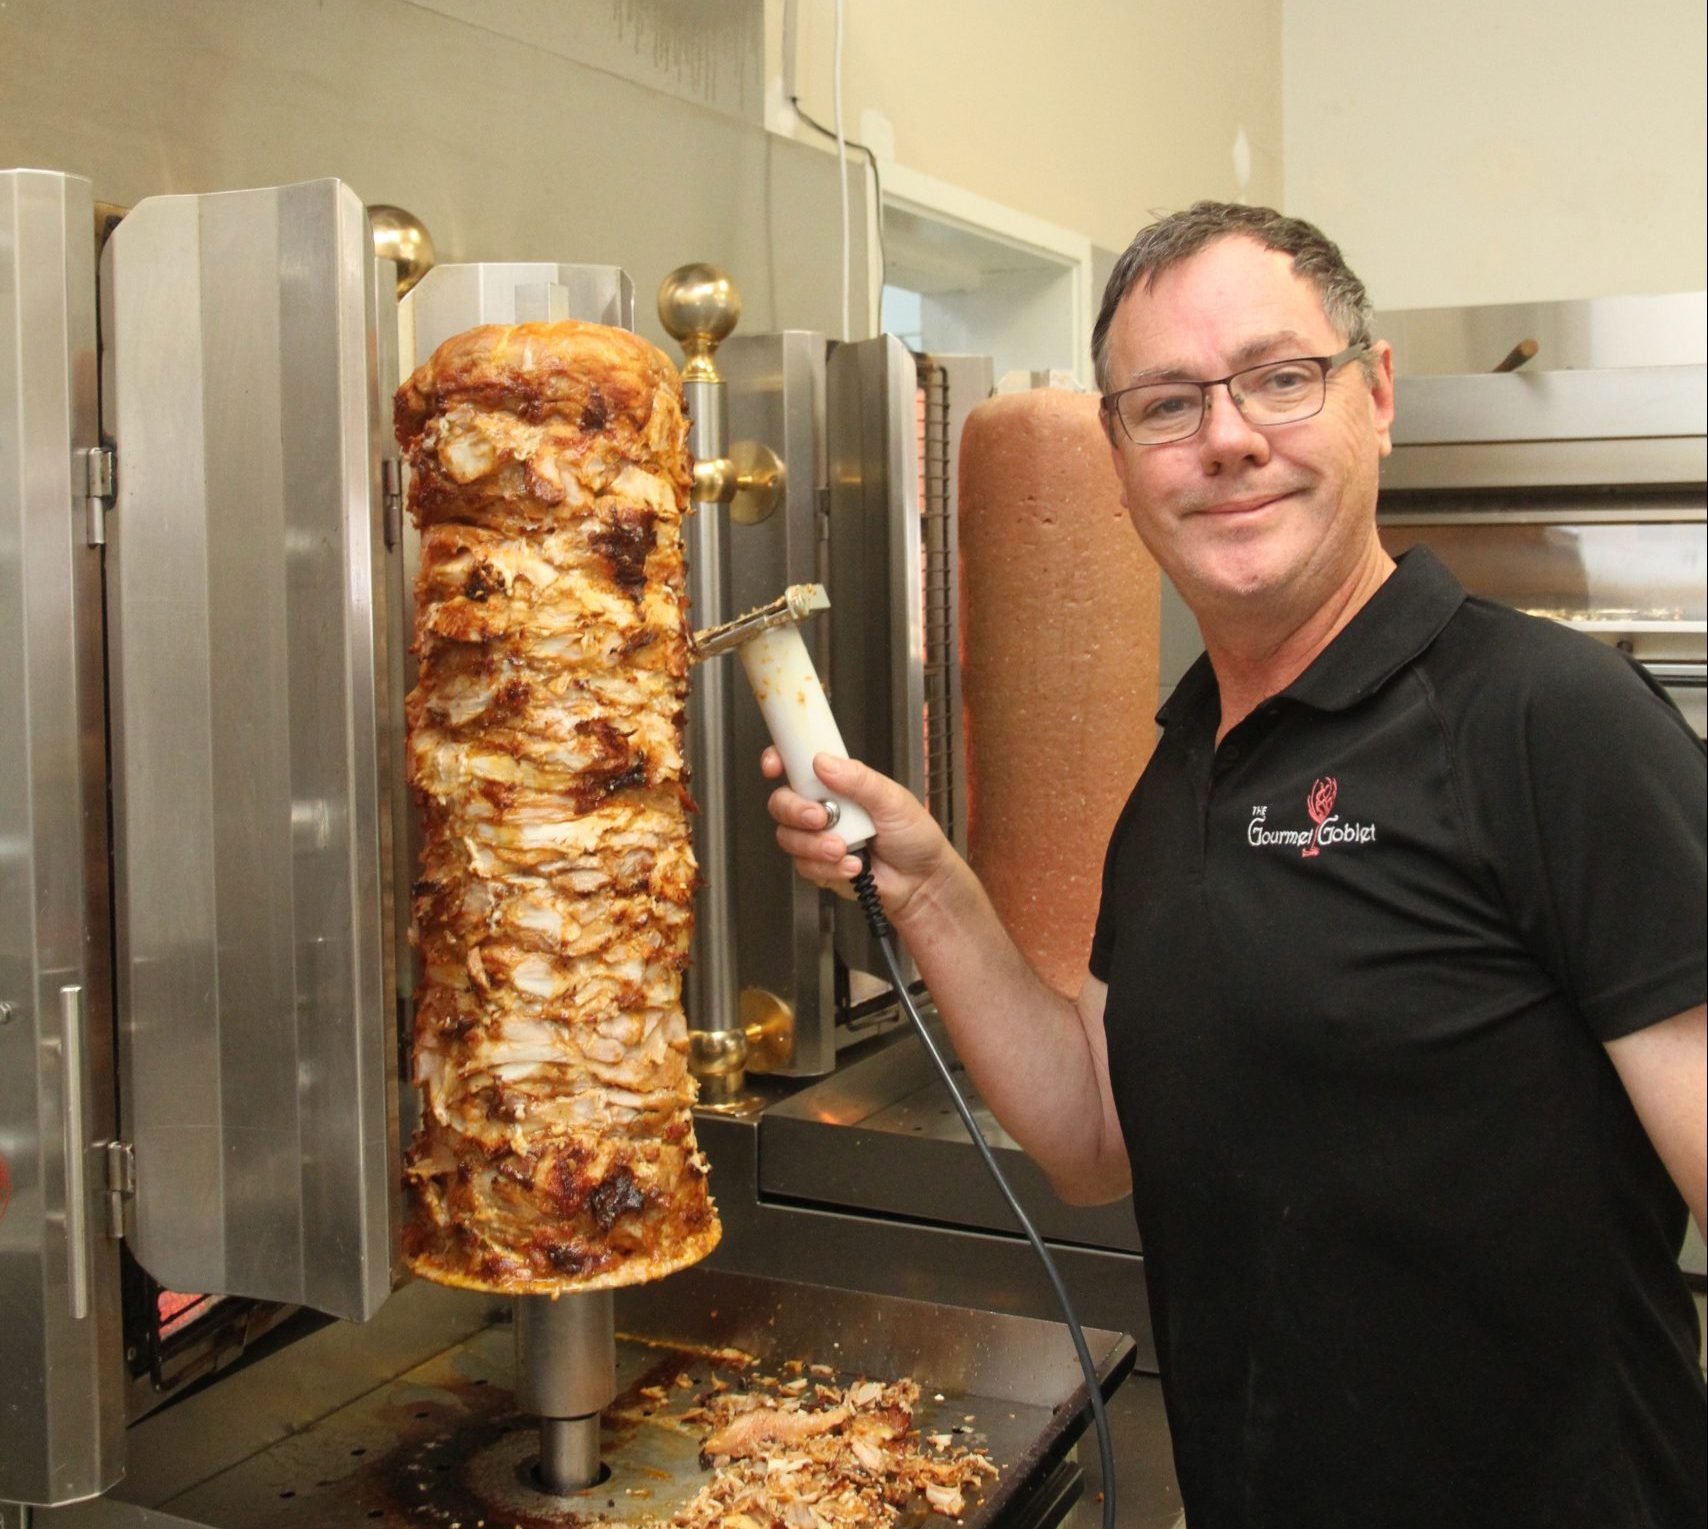 Doner kebabs a hit for the ‘new’ Monterey Cafe in Narrabri